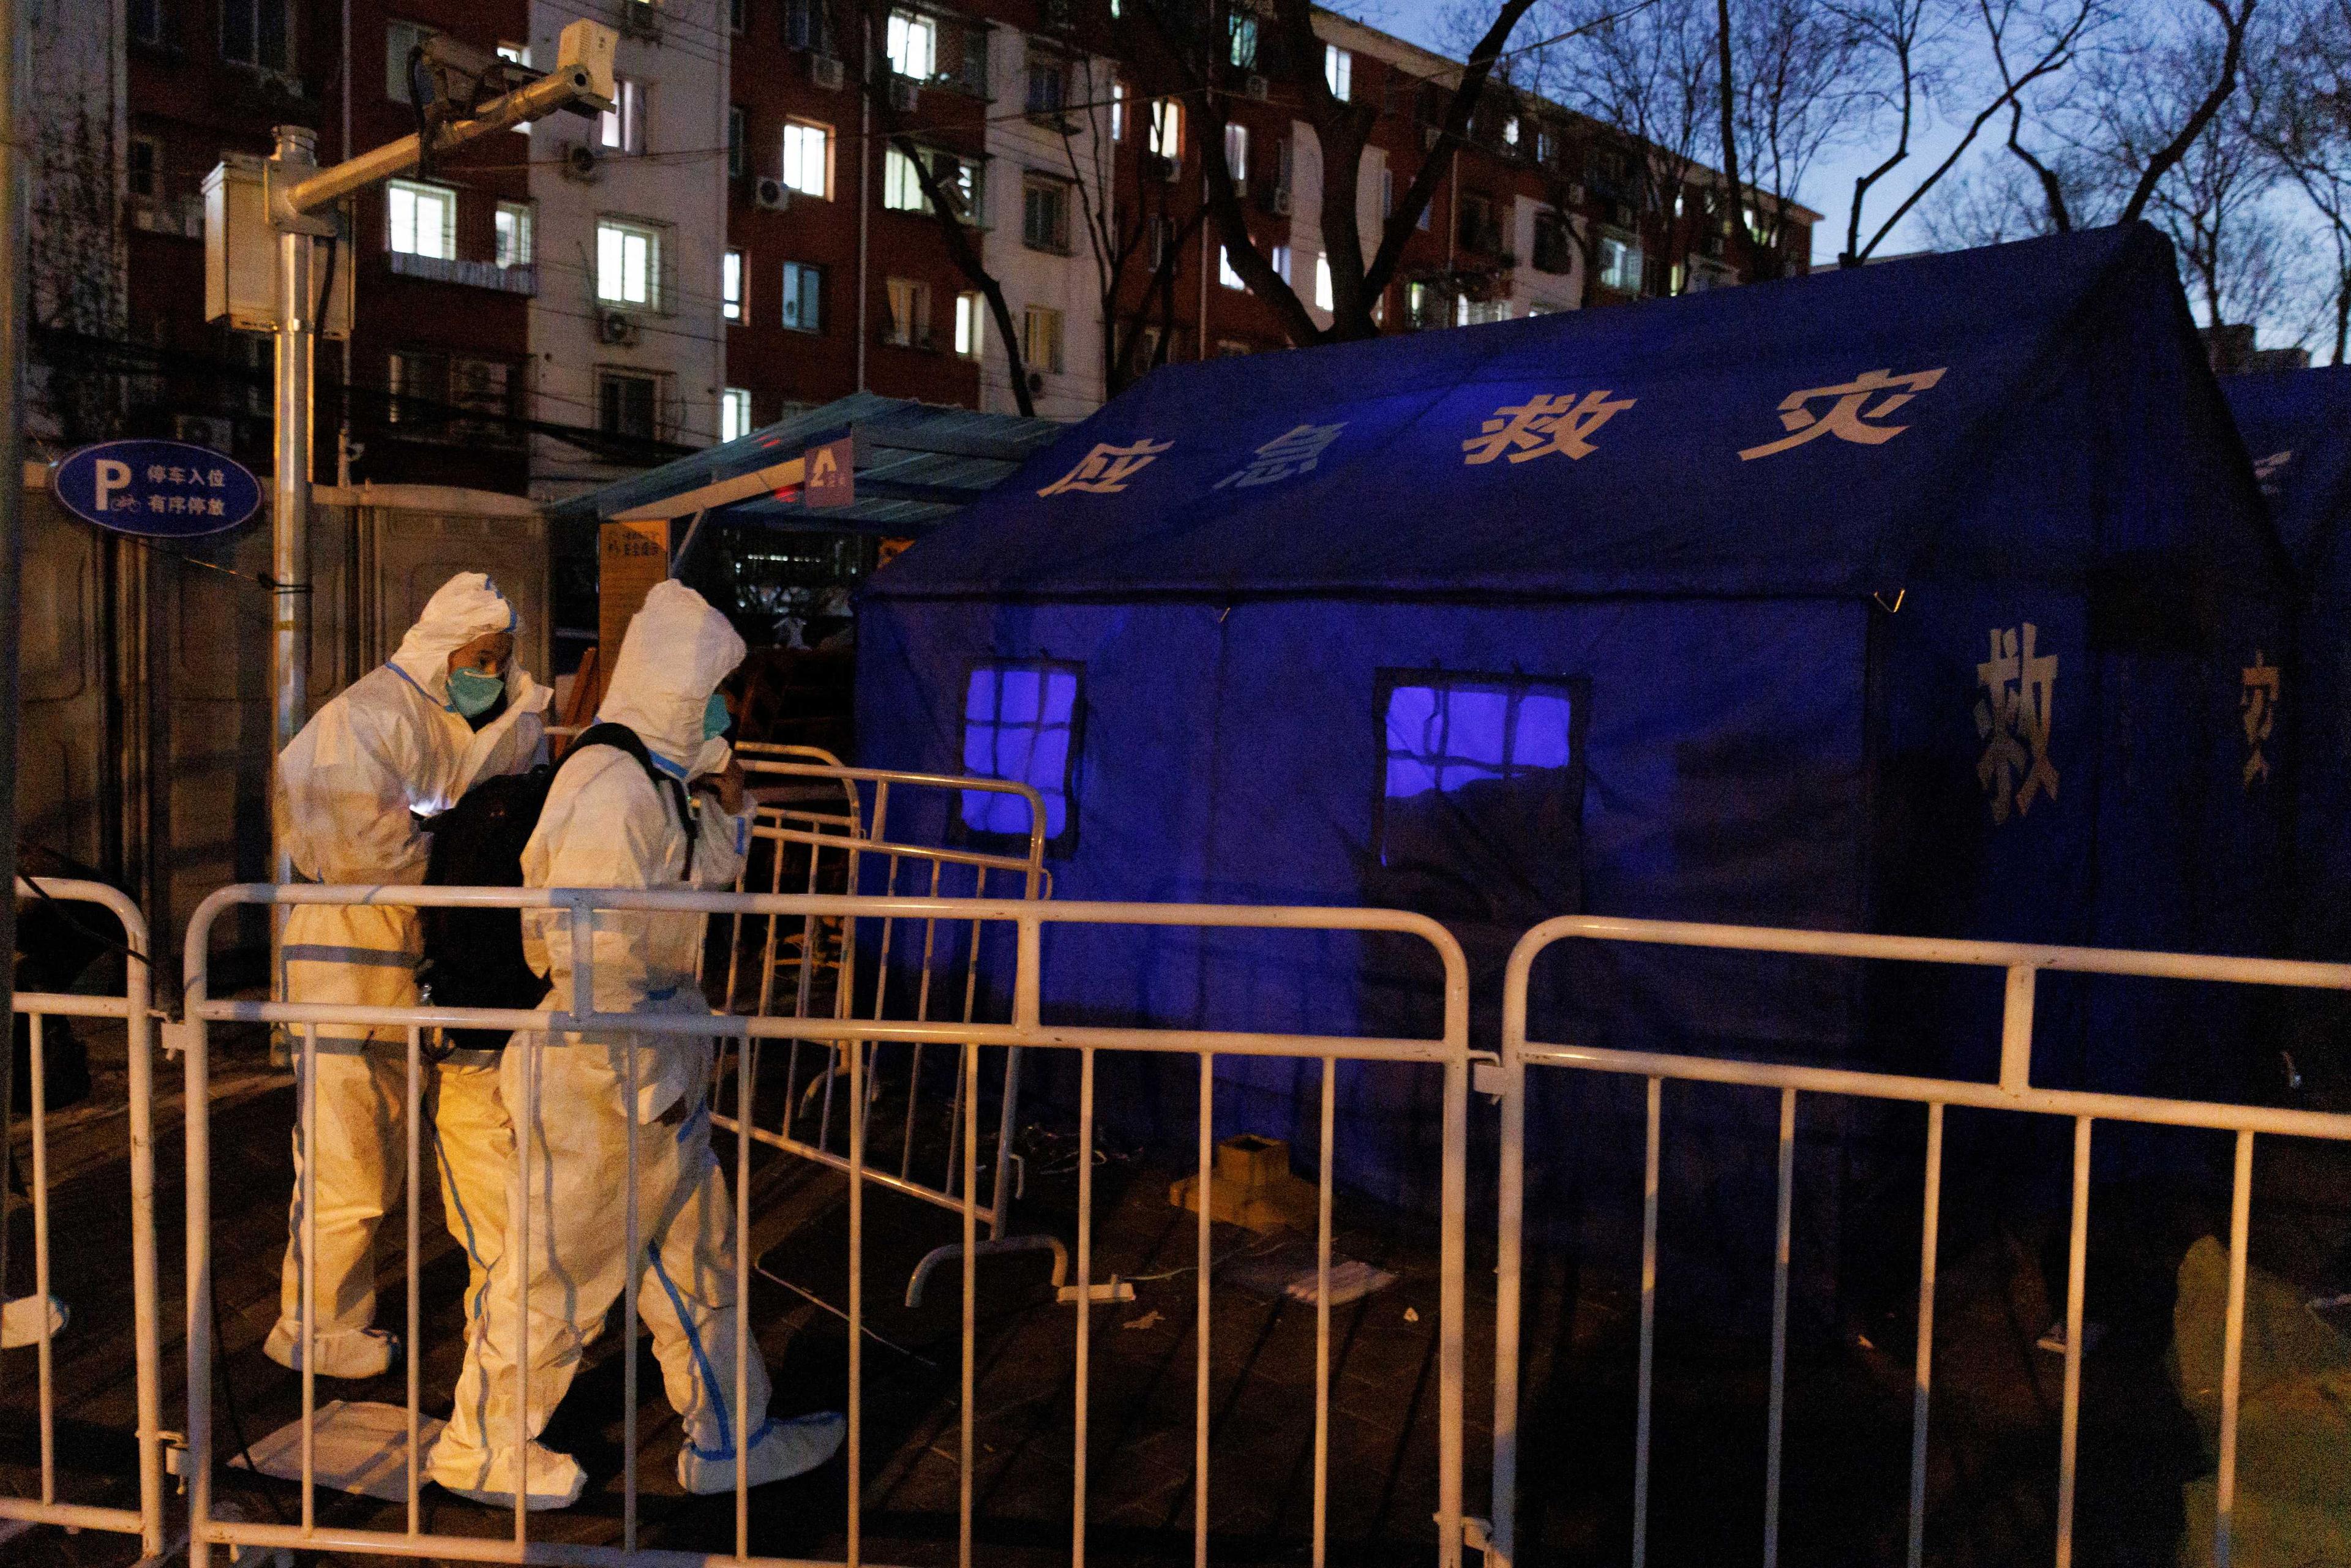 Pandemic prevention worker in protective suits approach tents that serve as their living quarters as Covid-19 outbreaks continue in Beijing, Dec 4. Photo: Reuters